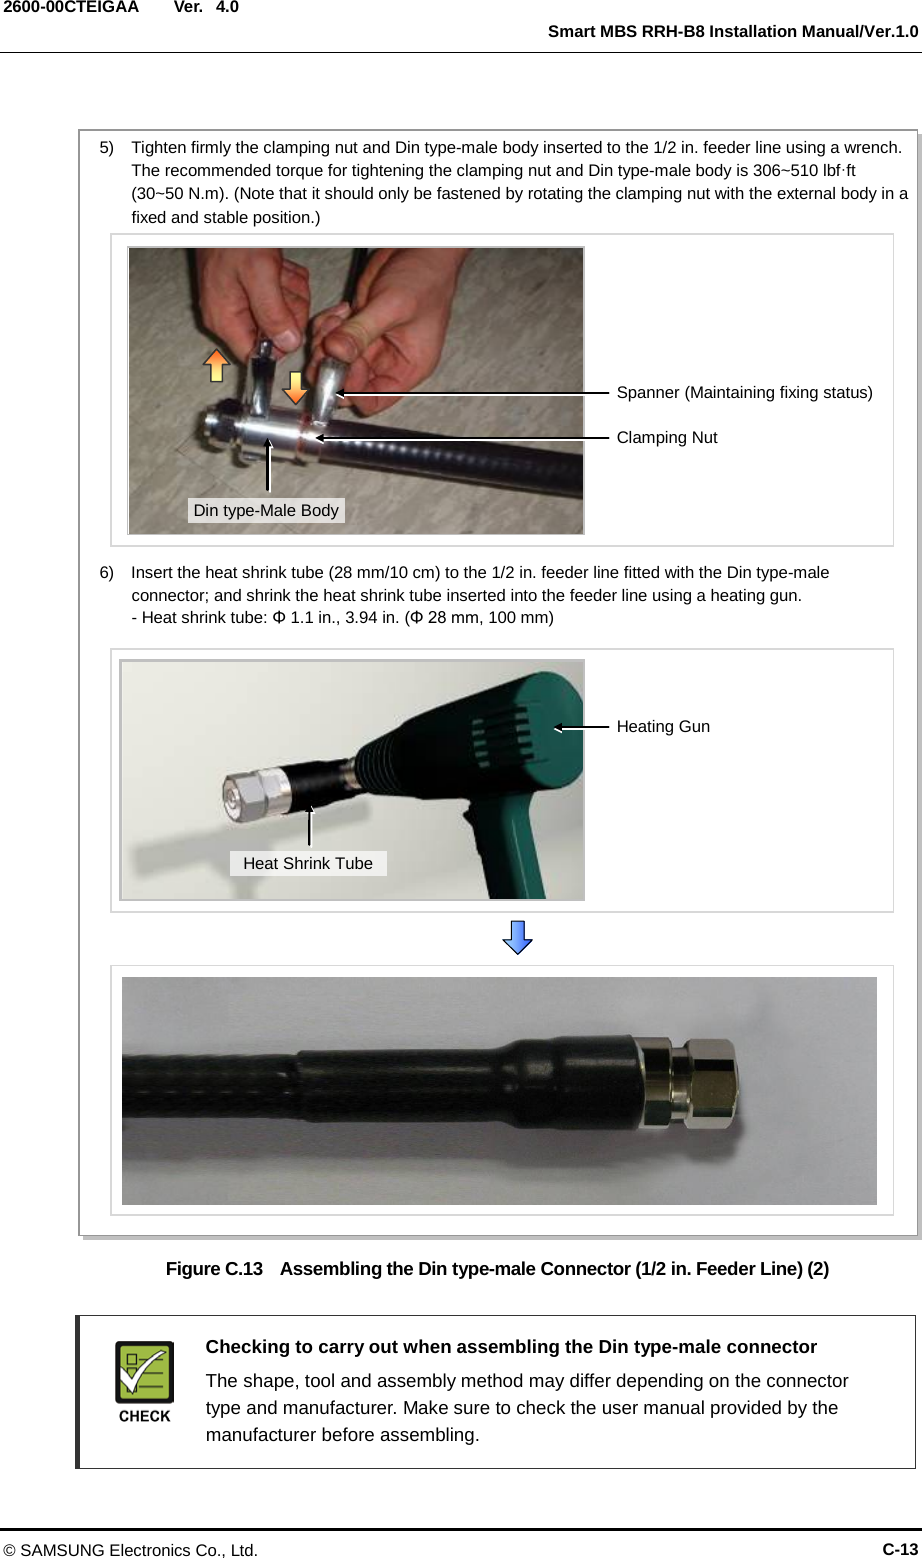  Ver.   Smart MBS RRH-B8 Installation Manual/Ver.1.0 2600-00CTEIGAA 4.0  Figure C.13  Assembling the Din type-male Connector (1/2 in. Feeder Line) (2)   Checking to carry out when assembling the Din type-male connector    The shape, tool and assembly method may differ depending on the connector type and manufacturer. Make sure to check the user manual provided by the manufacturer before assembling. Spanner (Maintaining fixing status) 5)  Tighten firmly the clamping nut and Din type-male body inserted to the 1/2 in. feeder line using a wrench. The recommended torque for tightening the clamping nut and Din type-male body is 306~510 lbf·ft (30~50 N.m). (Note that it should only be fastened by rotating the clamping nut with the external body in a fixed and stable position.) Clamping Nut Din type-Male Body 6)  Insert the heat shrink tube (28 mm/10 cm) to the 1/2 in. feeder line fitted with the Din type-male connector; and shrink the heat shrink tube inserted into the feeder line using a heating gun. - Heat shrink tube: Φ 1.1 in., 3.94 in. (Φ 28 mm, 100 mm) Heating Gun Heat Shrink Tube © SAMSUNG Electronics Co., Ltd. C-13 